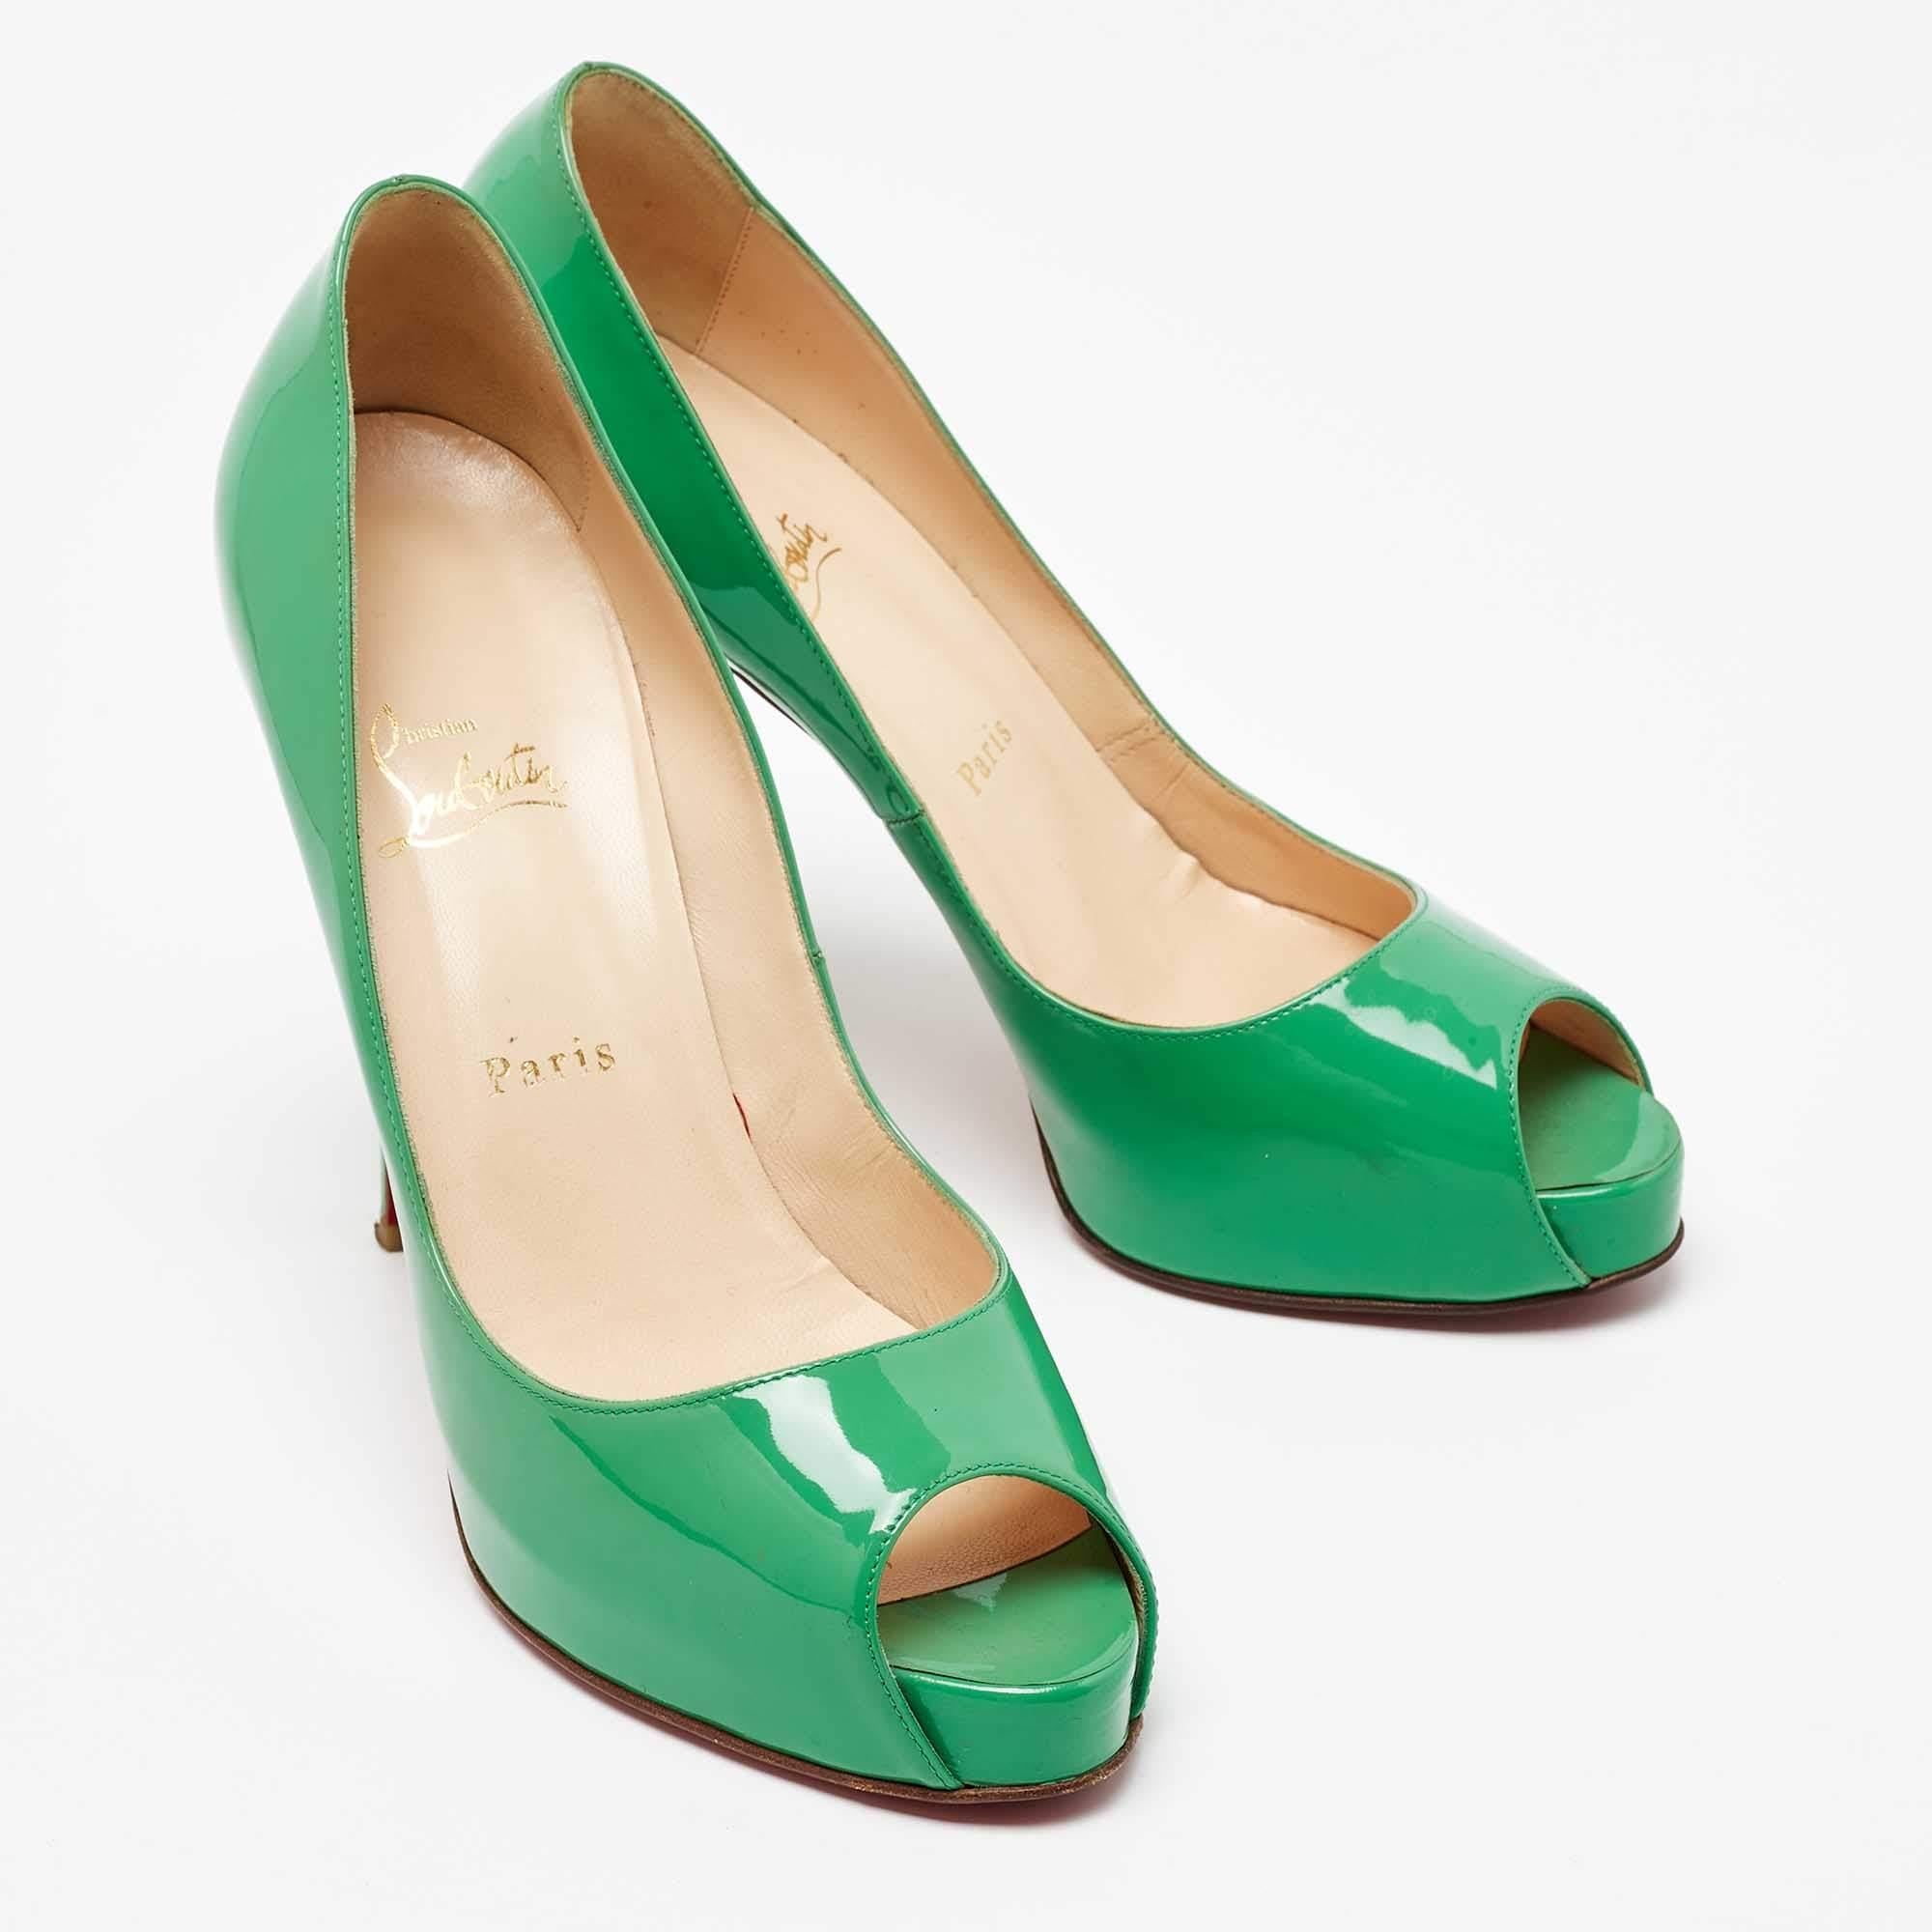 Christian Louboutin Green Patent Leather Very Prive Pumps Size 41 For Sale 2